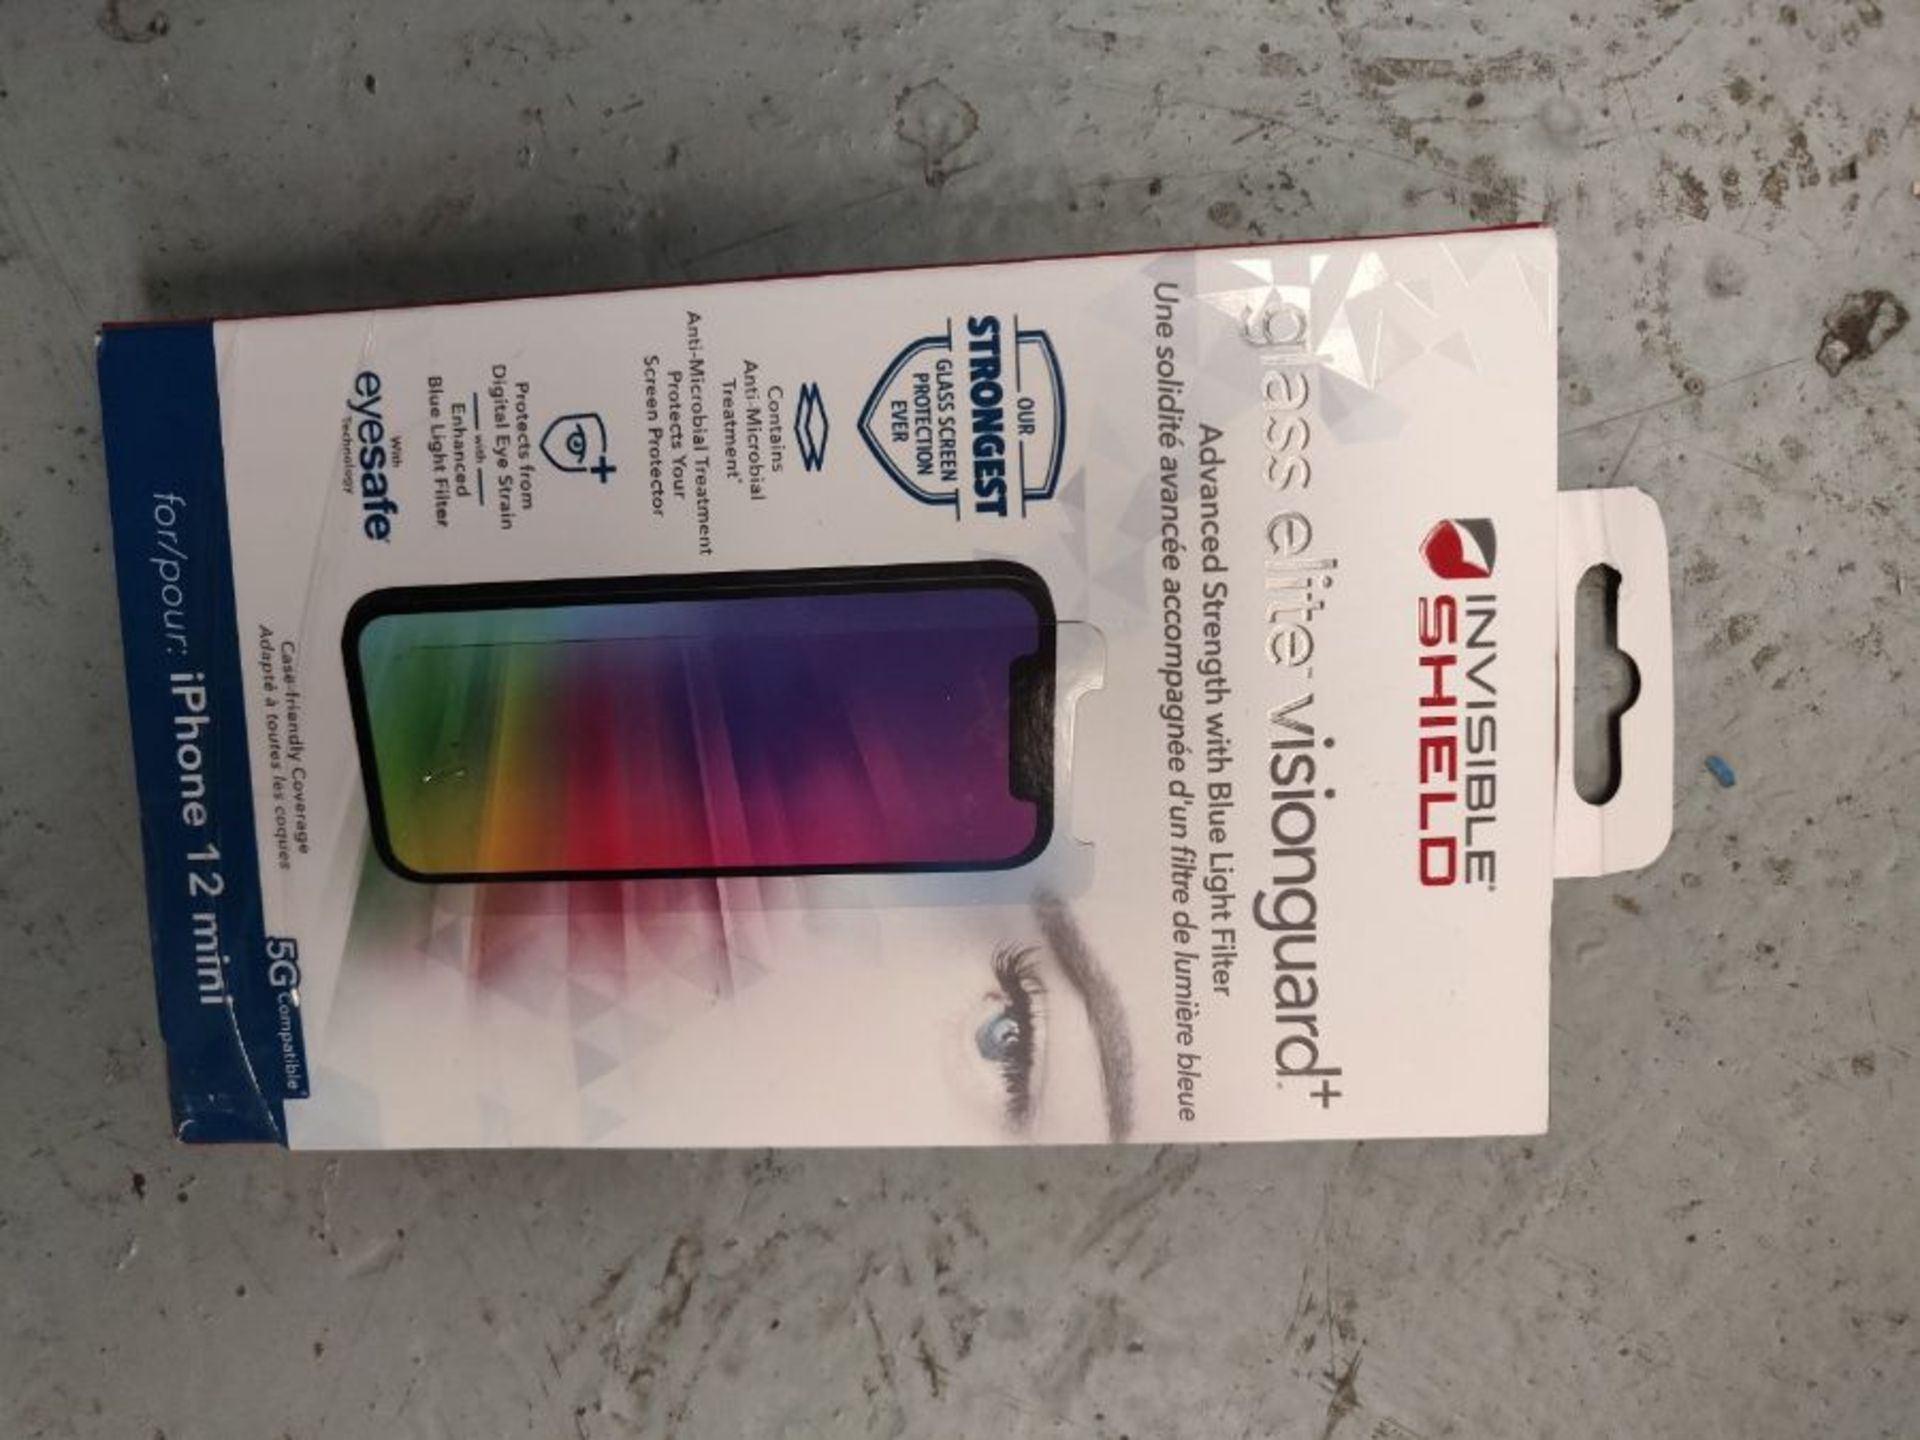 ZAGG - InvisibleShield Glass Elite VisionGuard Plus - Blue Light Filter for Apple iPho - Image 2 of 3